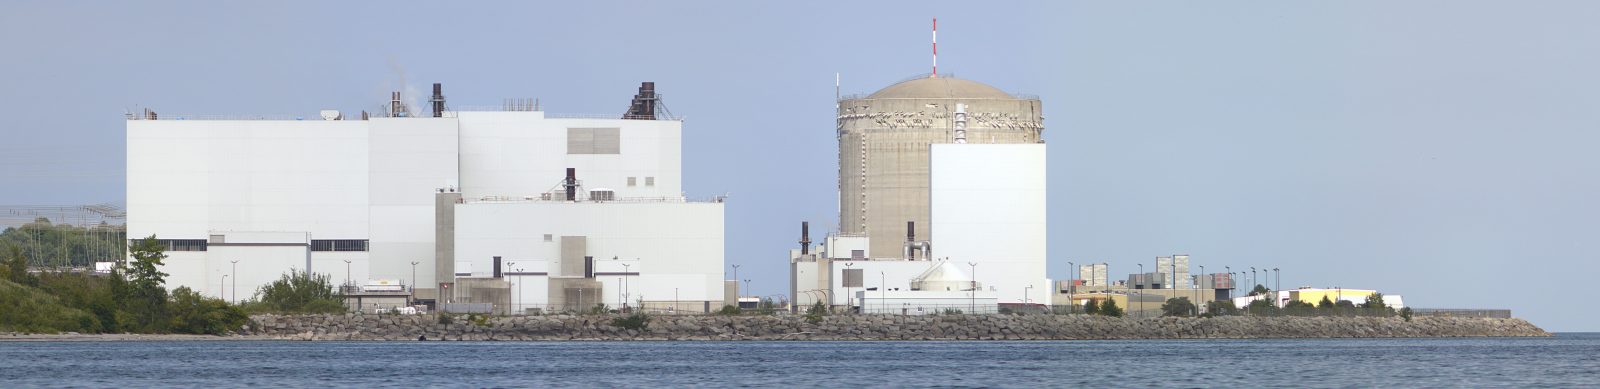 A nuclear plant stands next to a body of water.